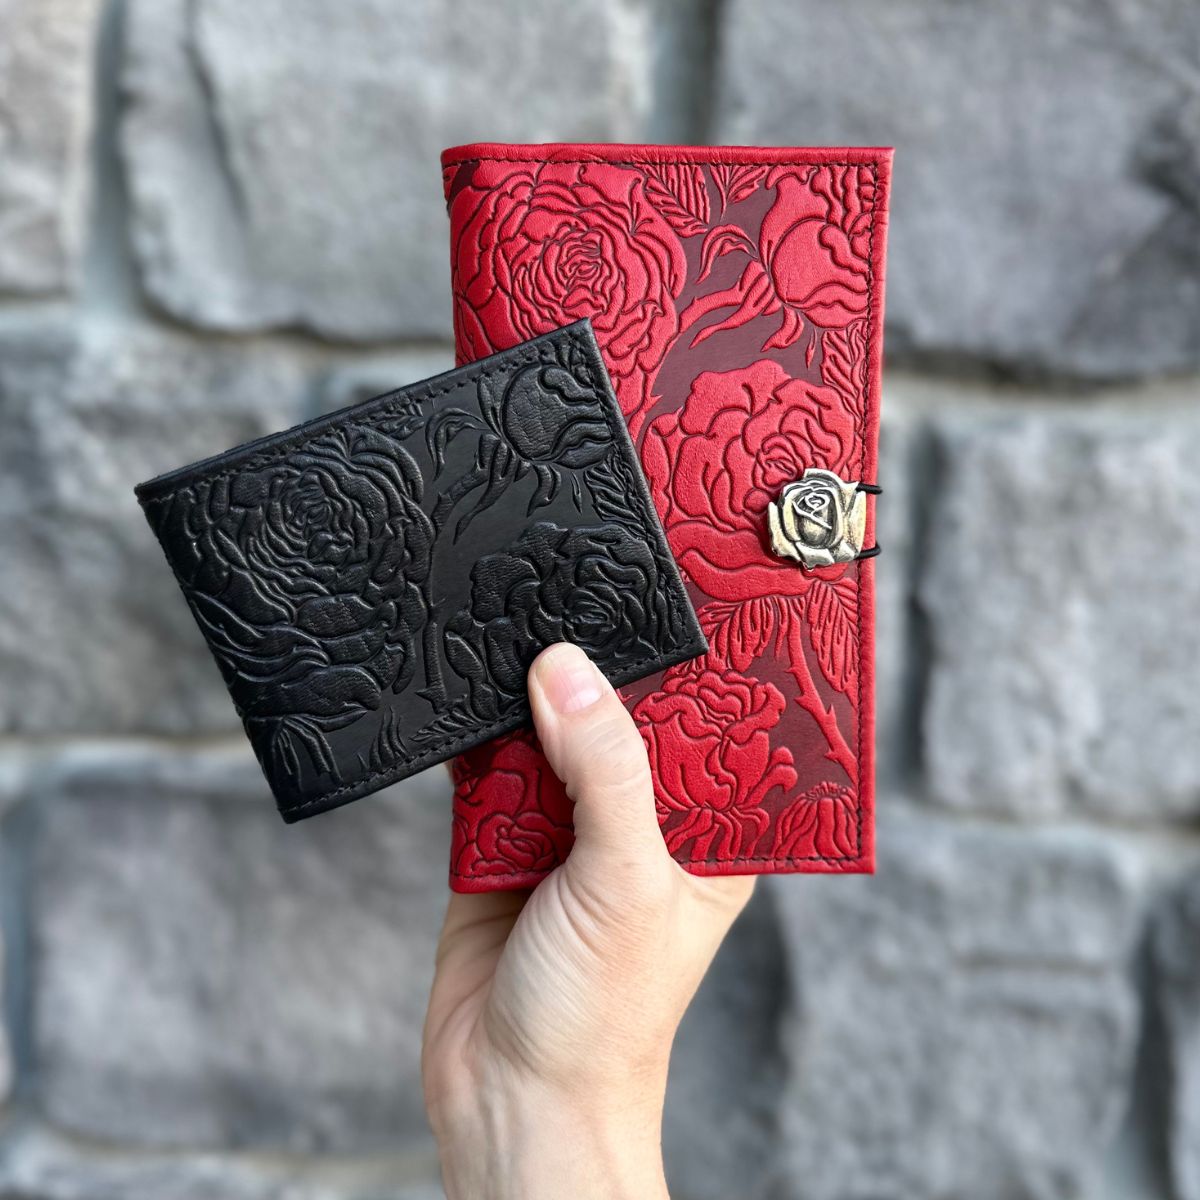 Oberon Design Hand-Crafted Genuine Leather Wallets, Checkbooks and Accessories